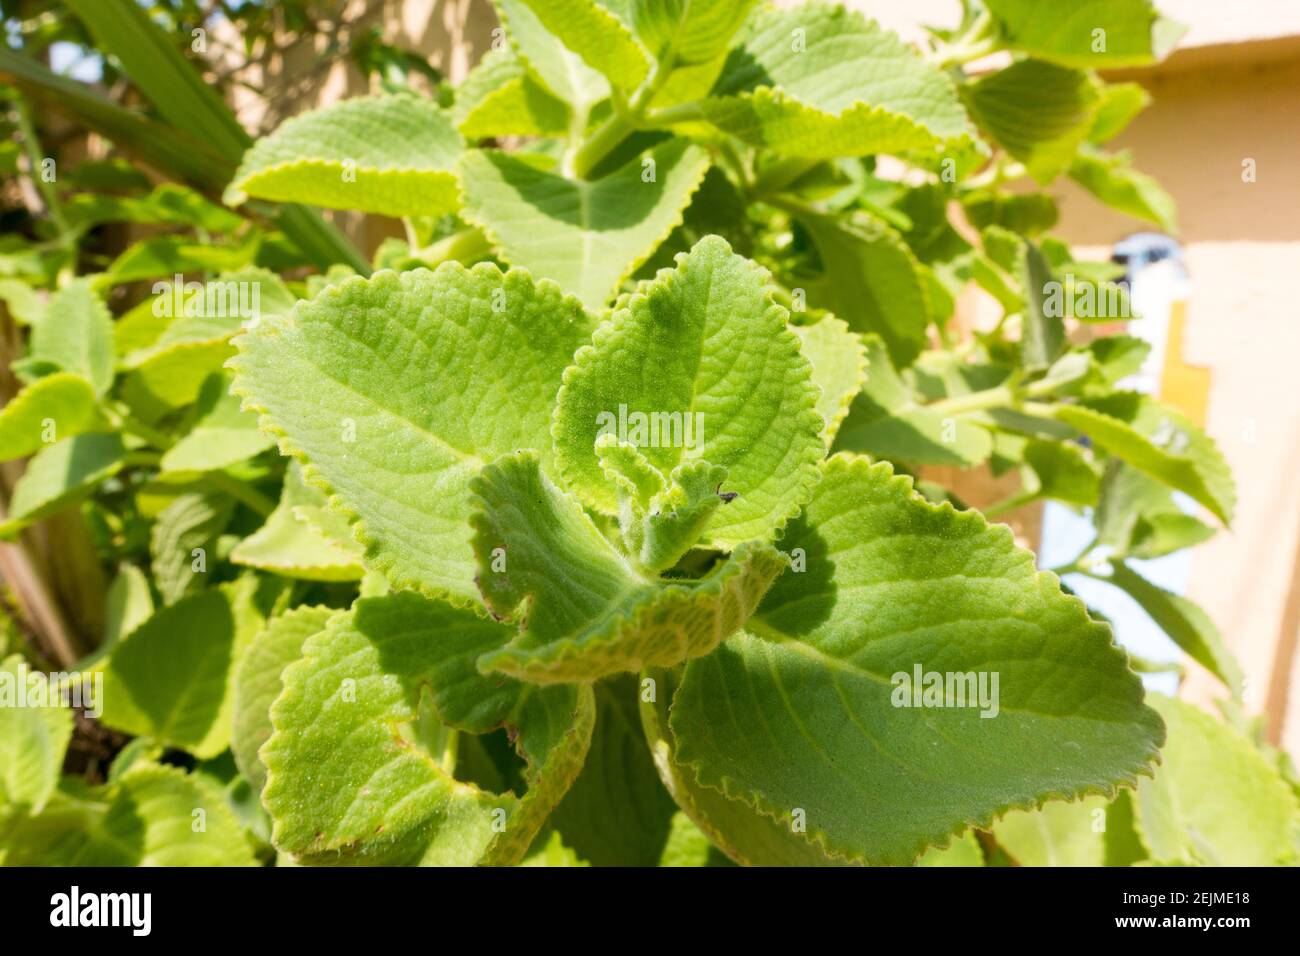 Coleus amboinicus or Plectranthus amboinicus or Mexican Mint or Indian borage plant Stock Photo